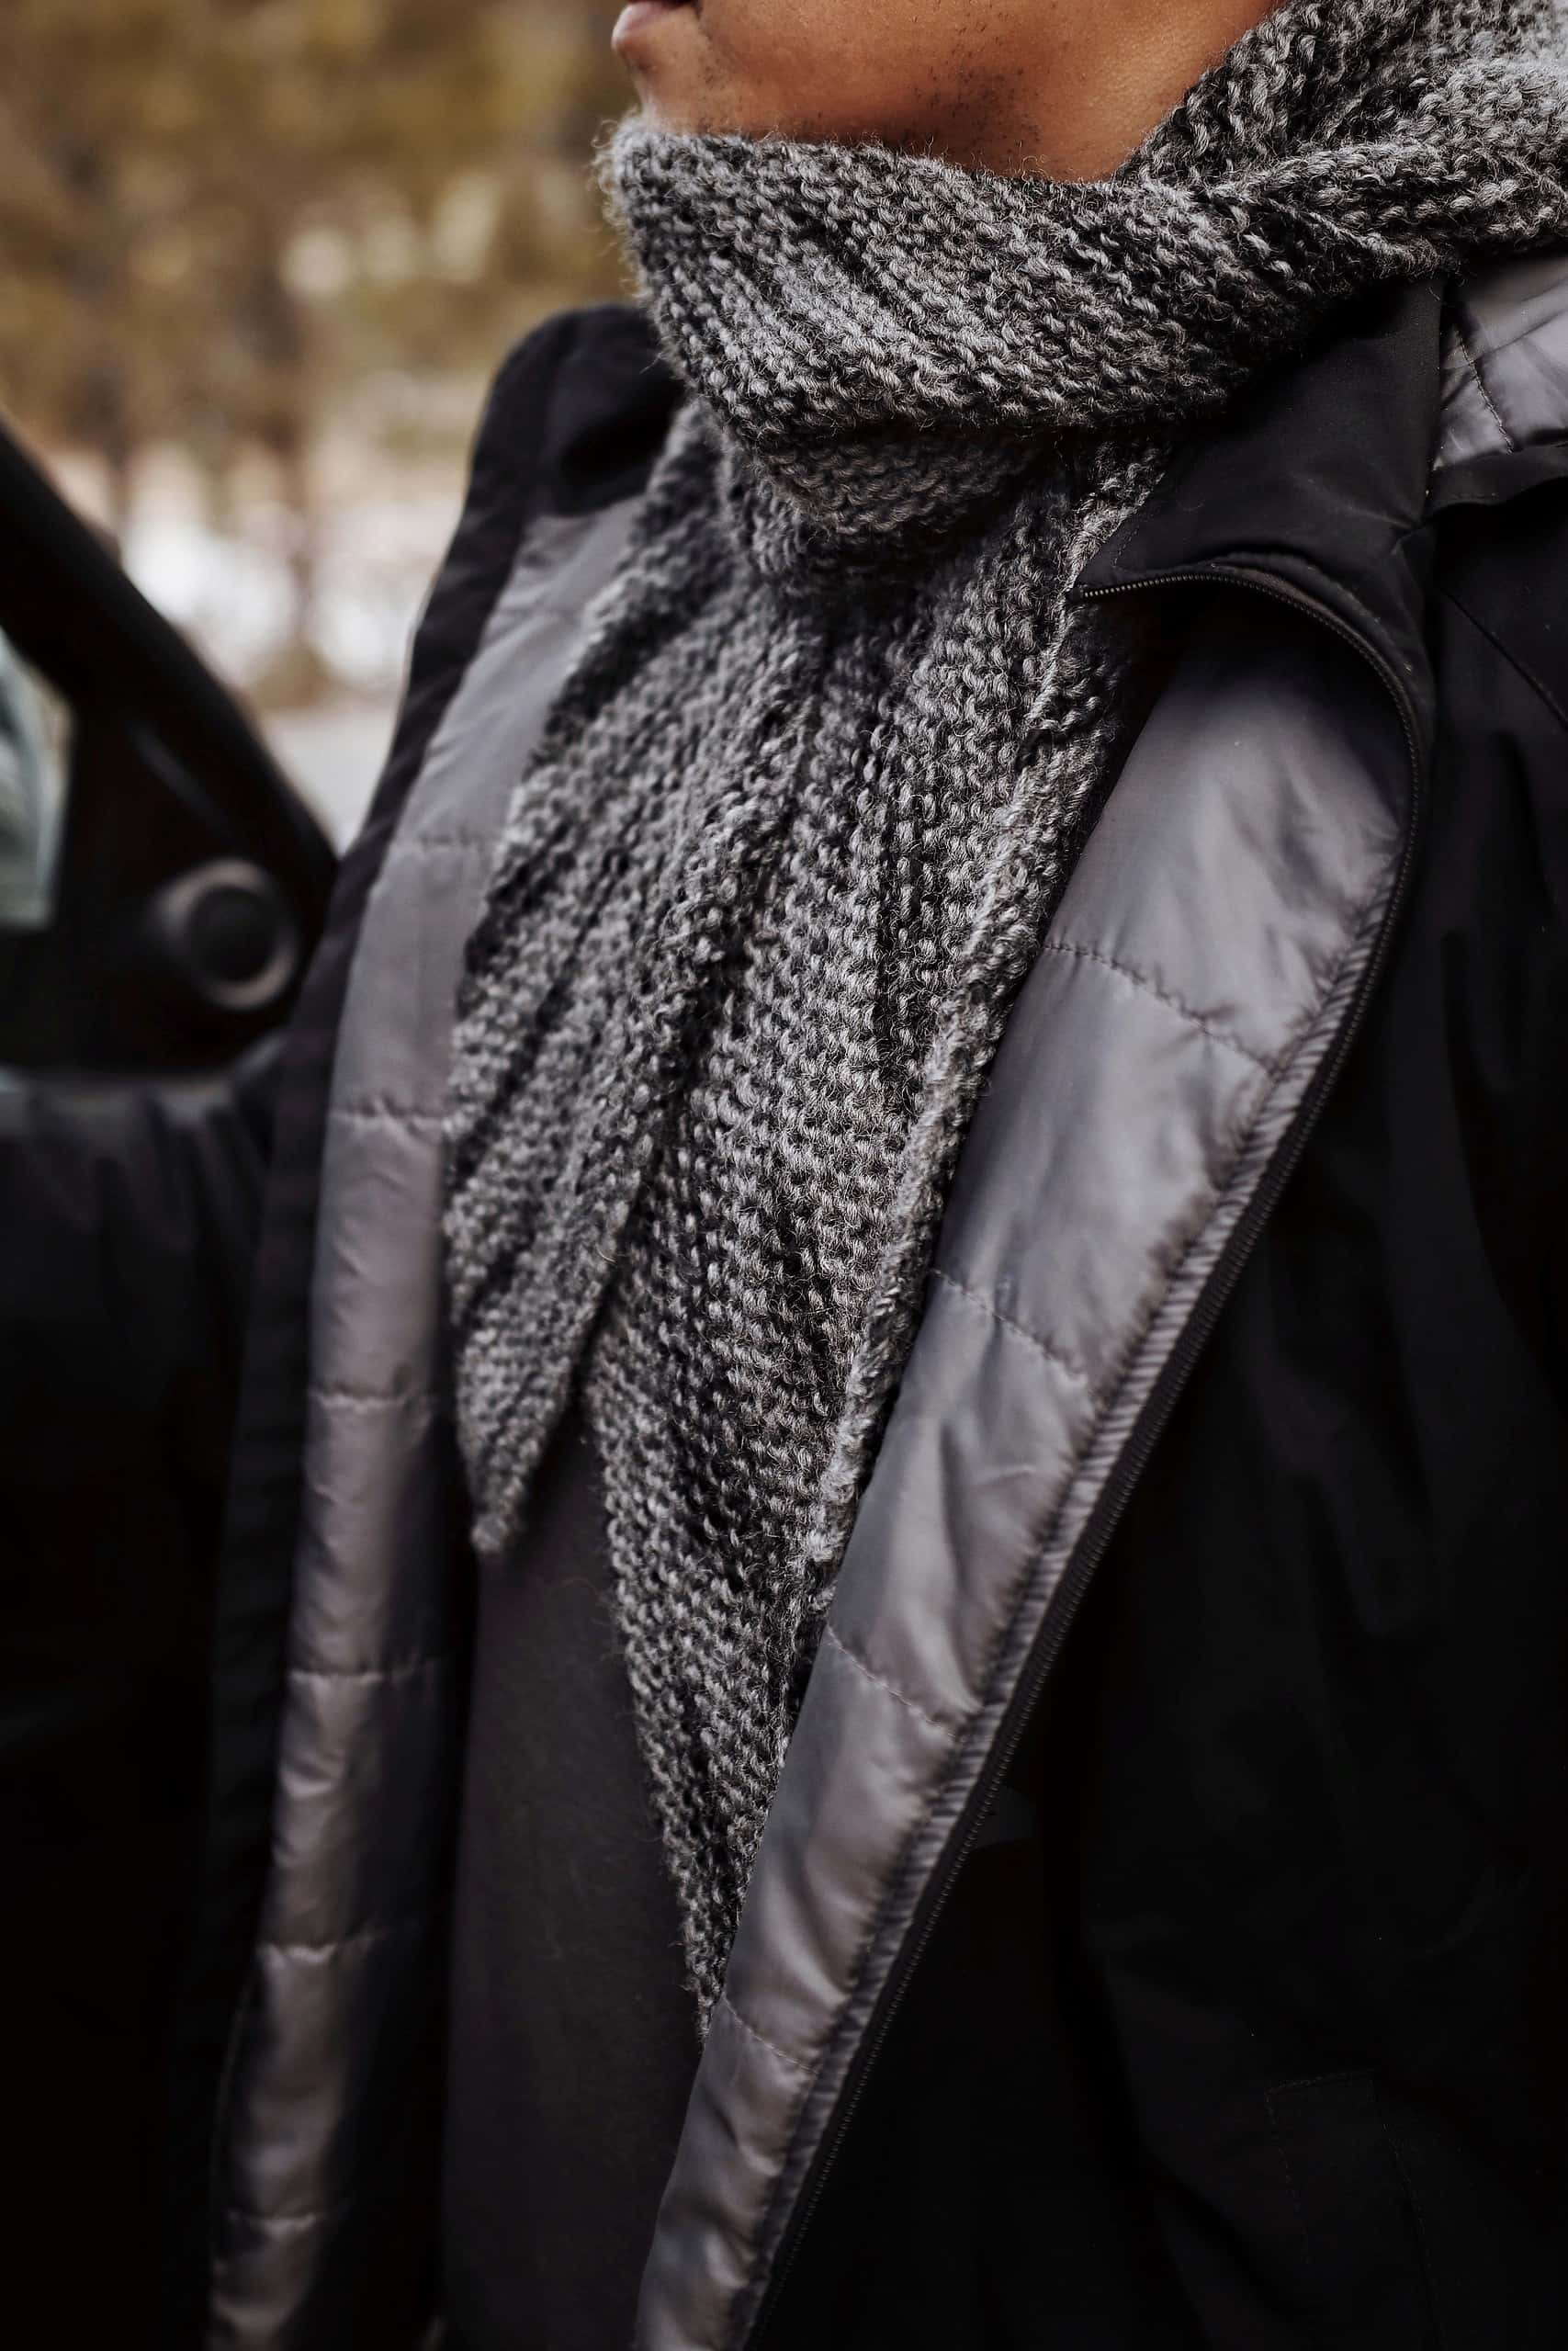 Bias Knit Men's Scarf Knitting Pattern by Darling Jadore, The Altitude ...